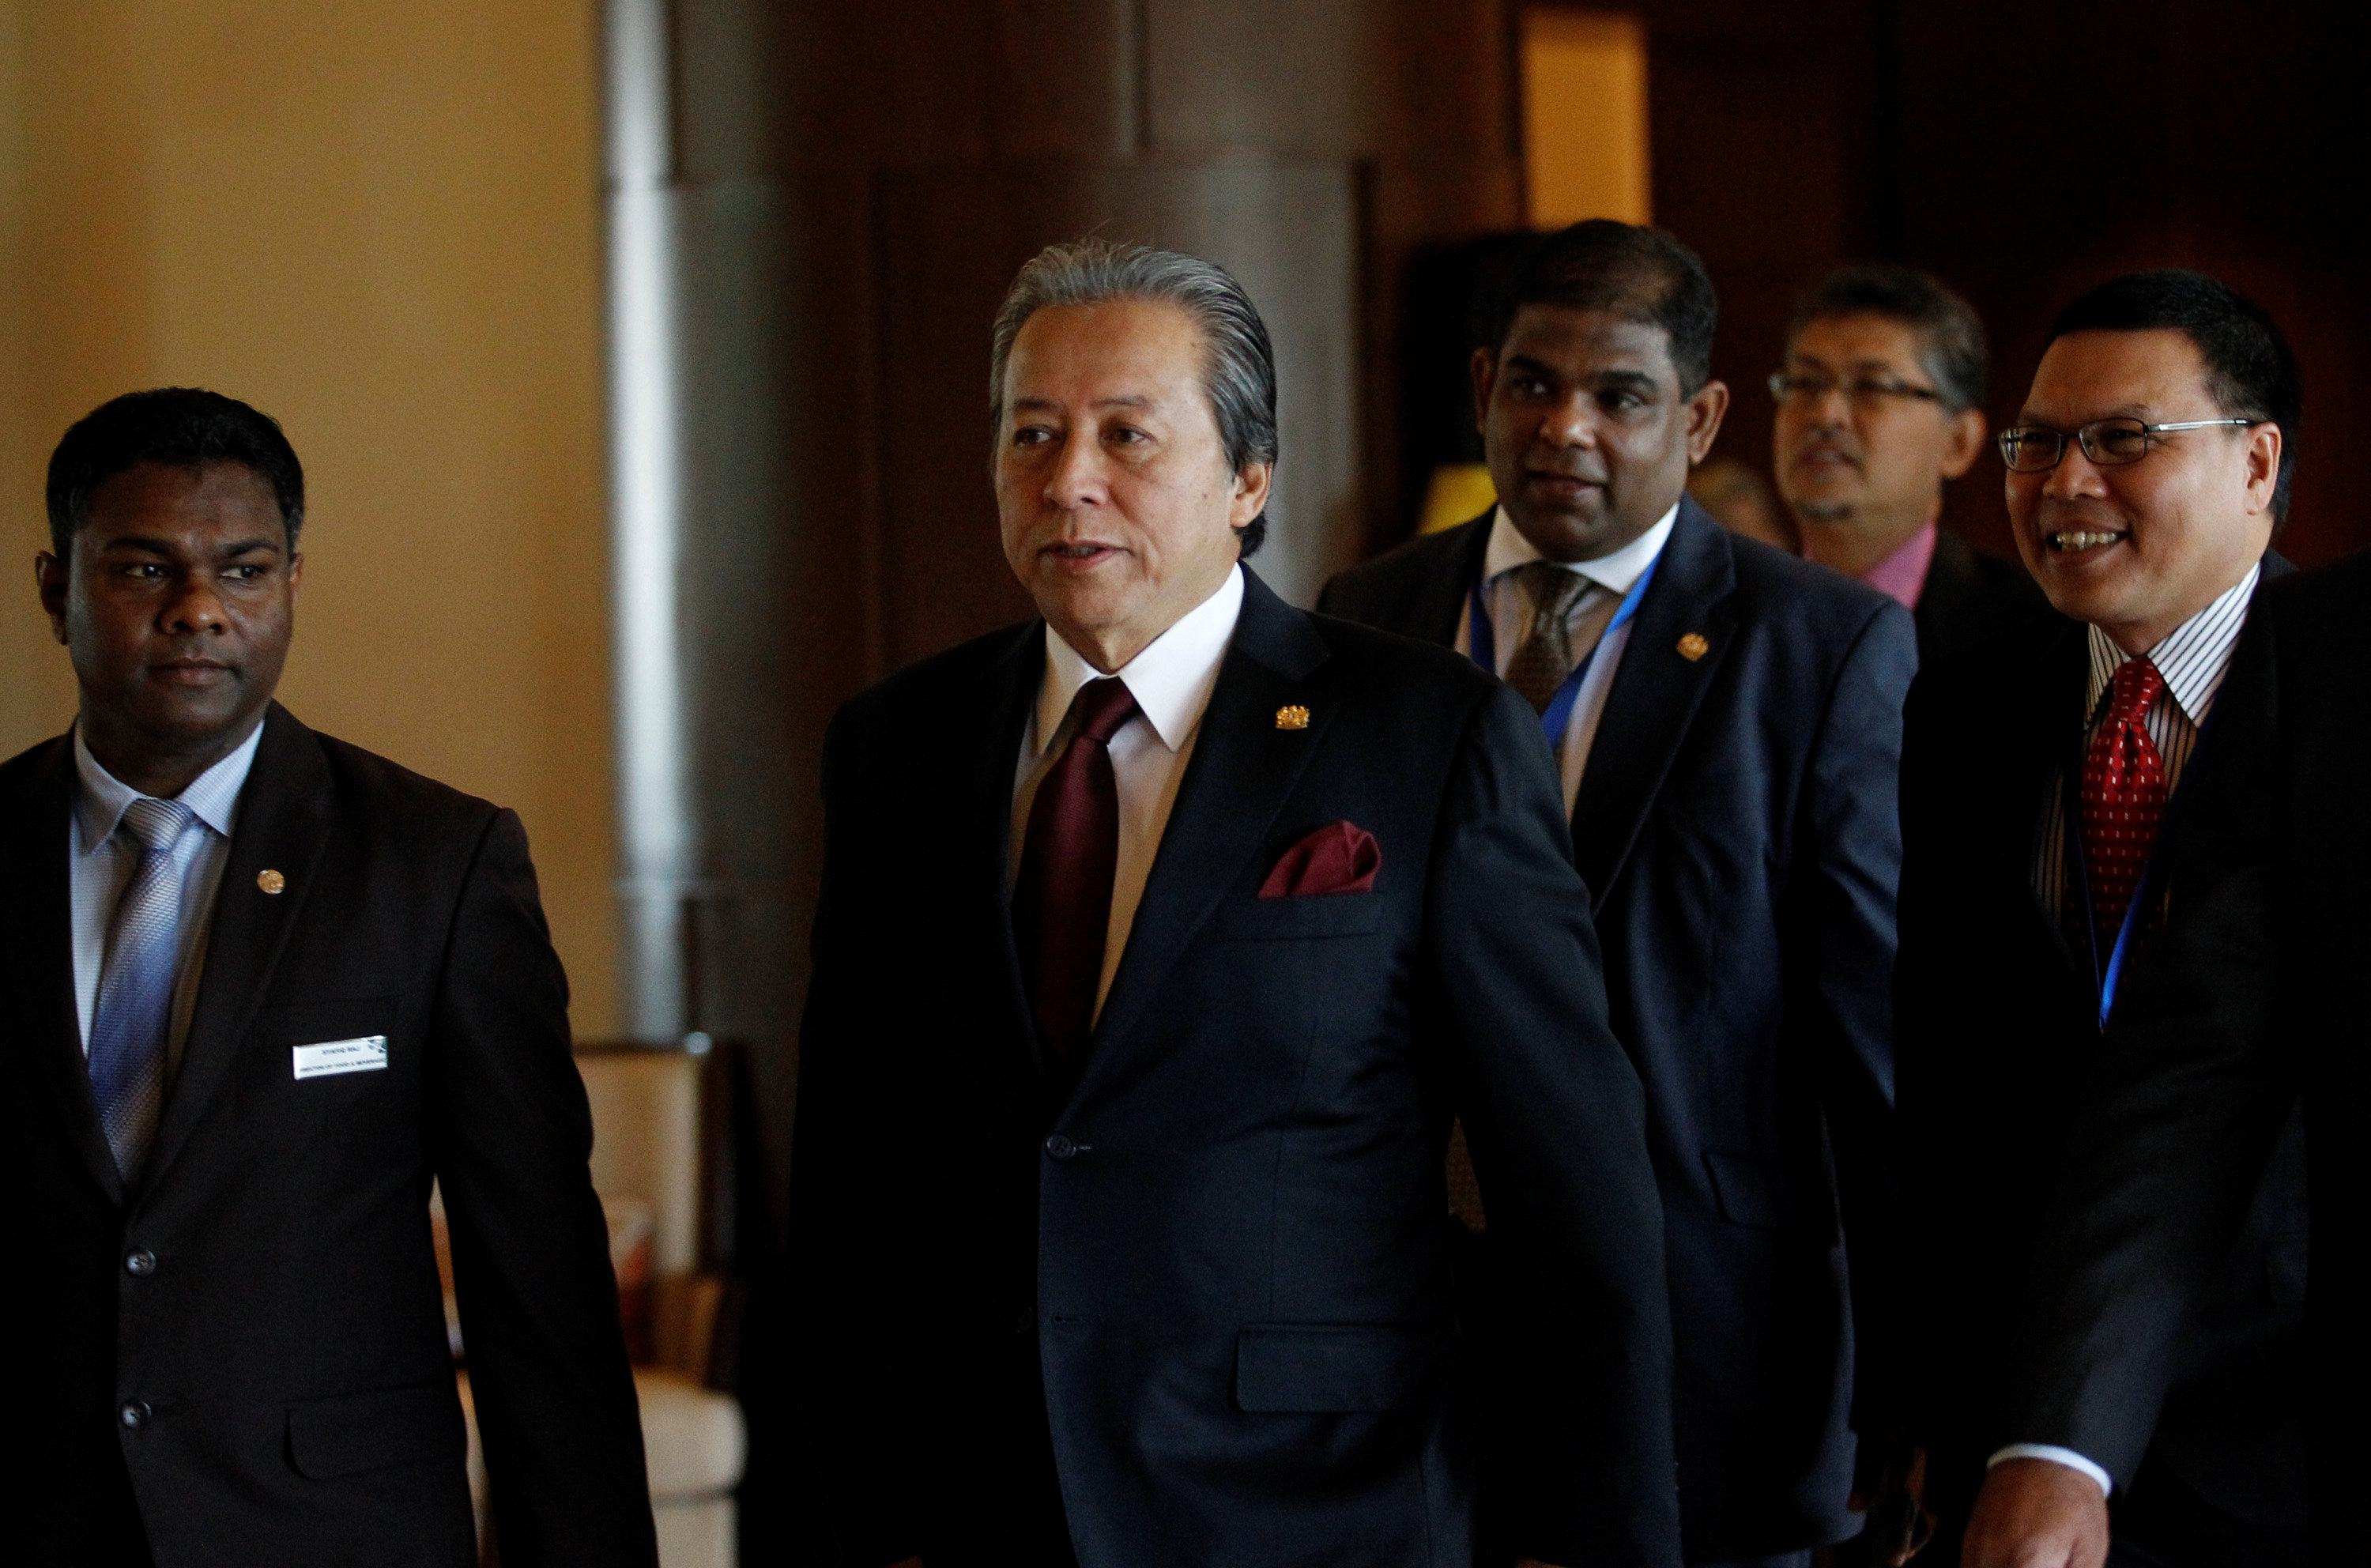 Malaysia Foreign Minister Anifah Aman arrives to attend ASEAN Foreign Minister Meeting for Rohingya issue in Sedona hotel at Yangon, Myanmar December 19, 2016. REUTERS/Soe Zeya Tunn